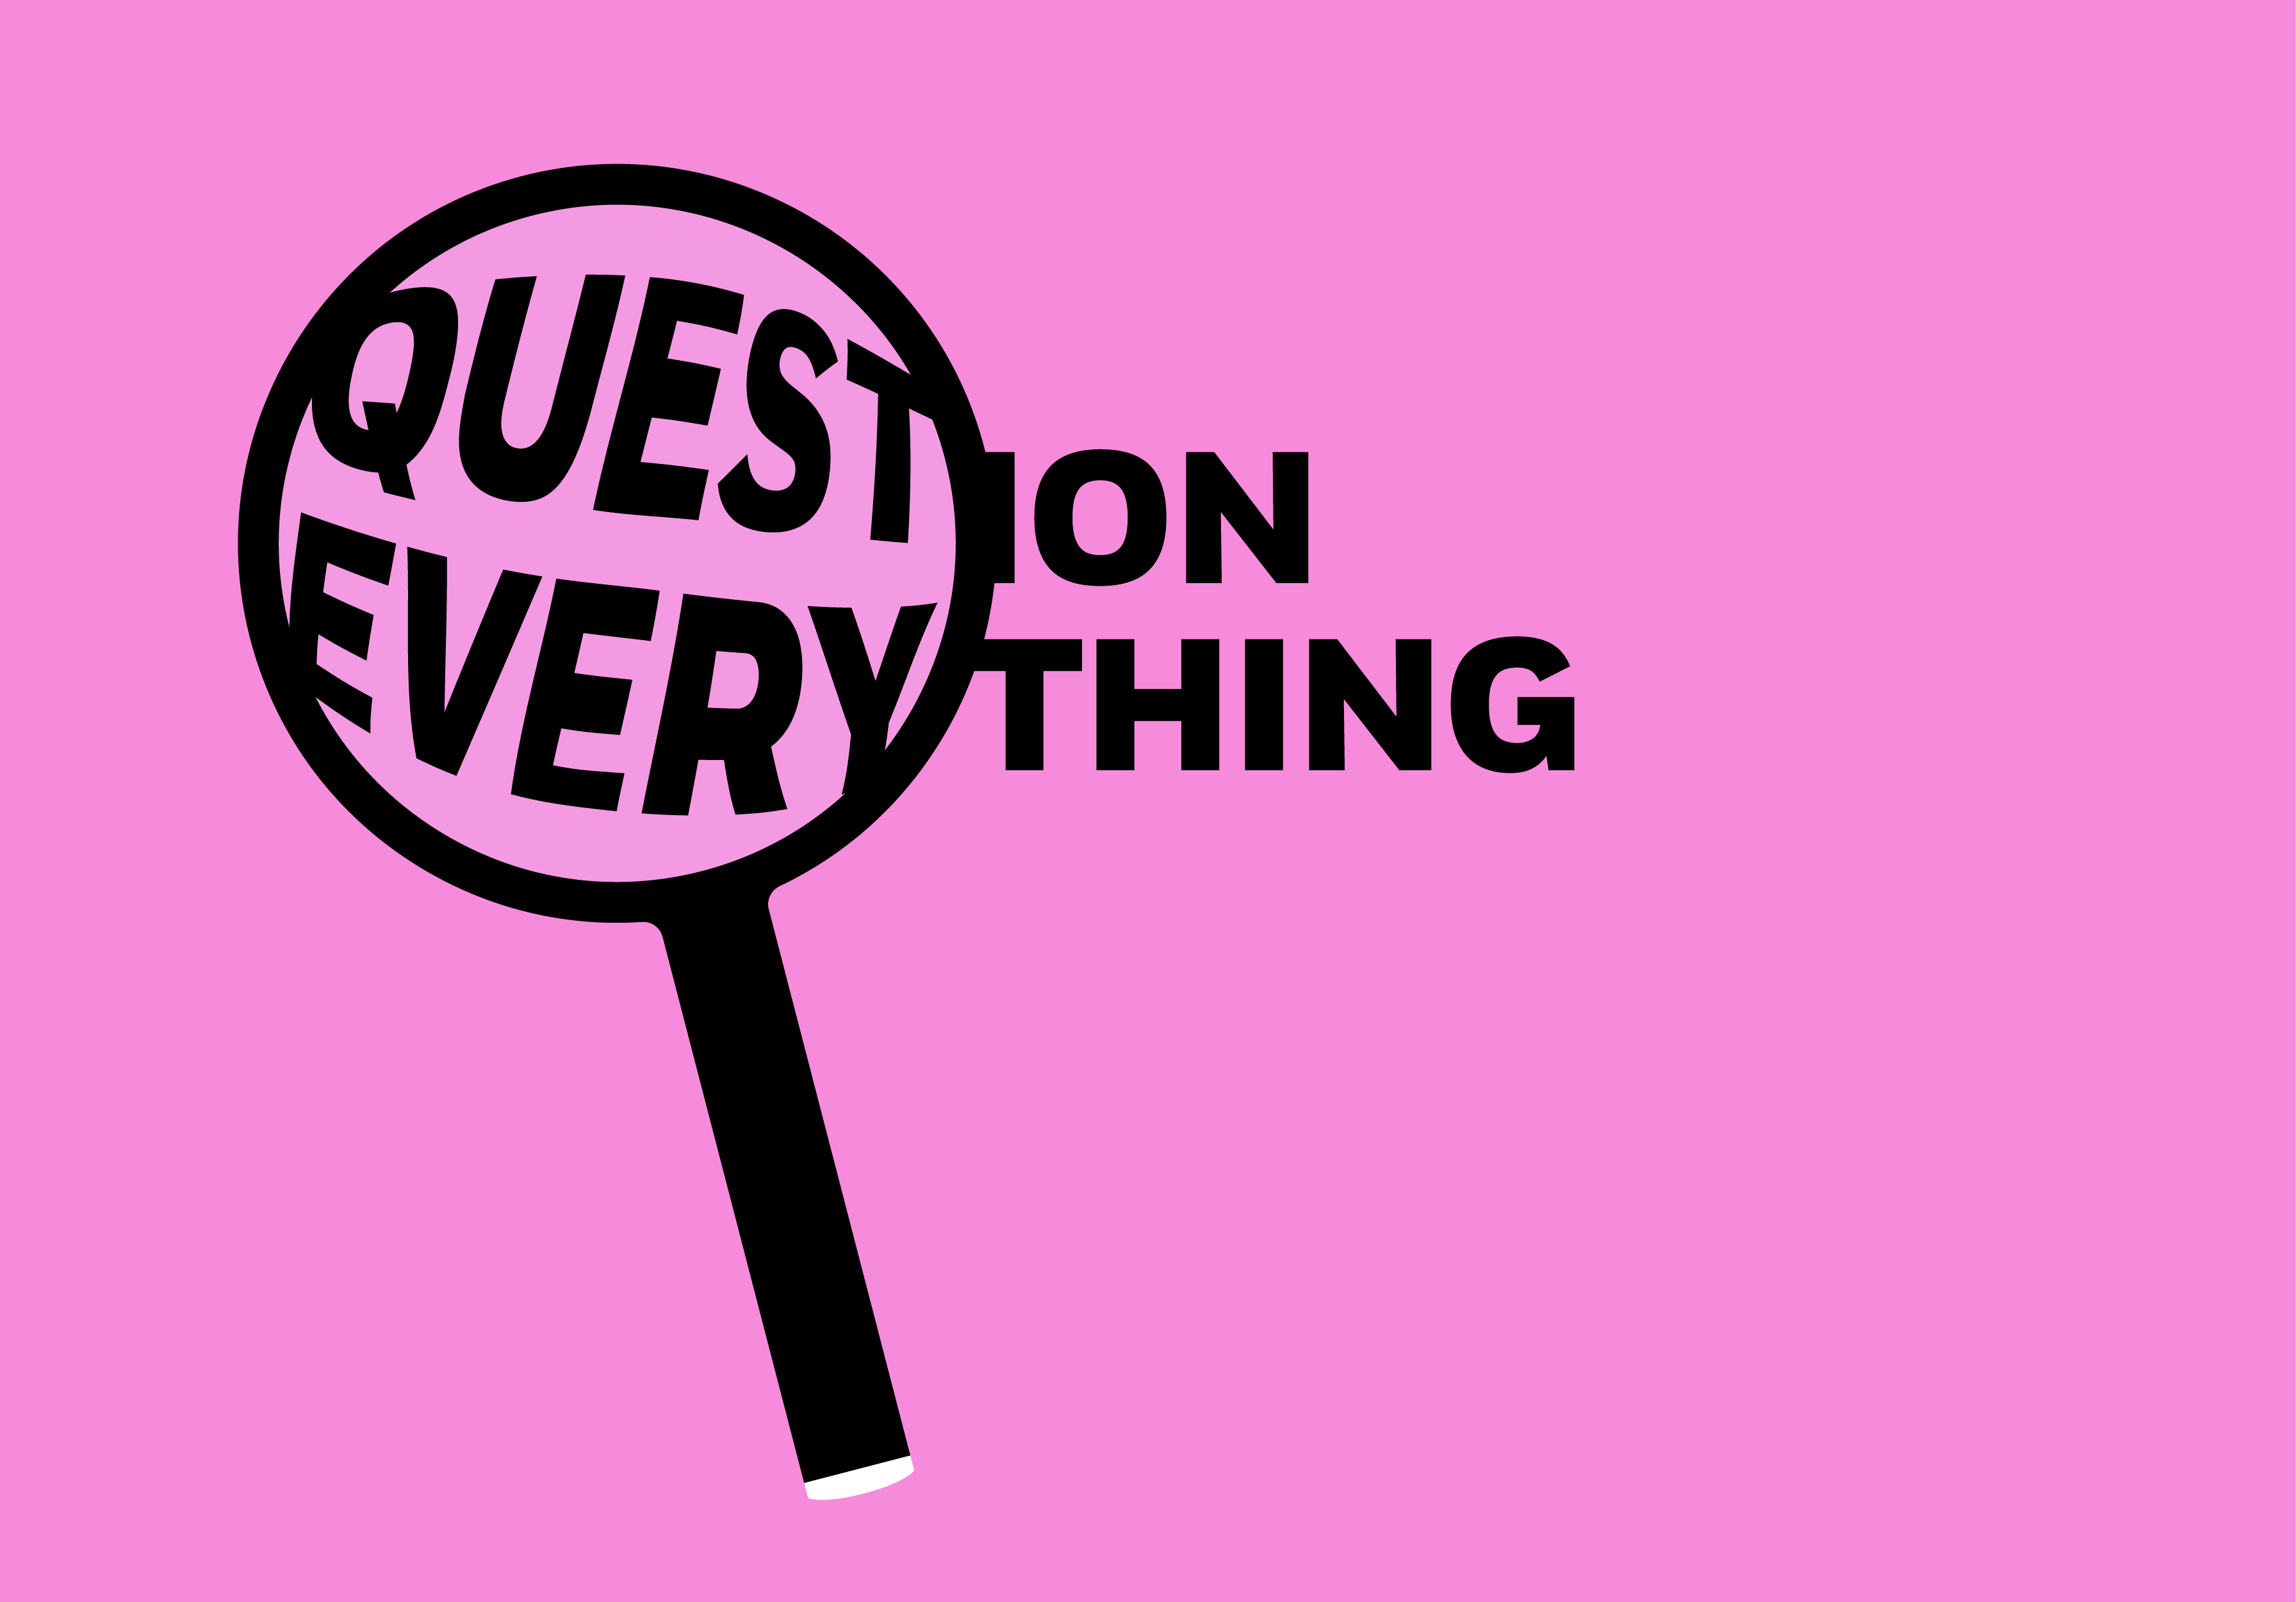 Image of Question everything magnifying glass is attached